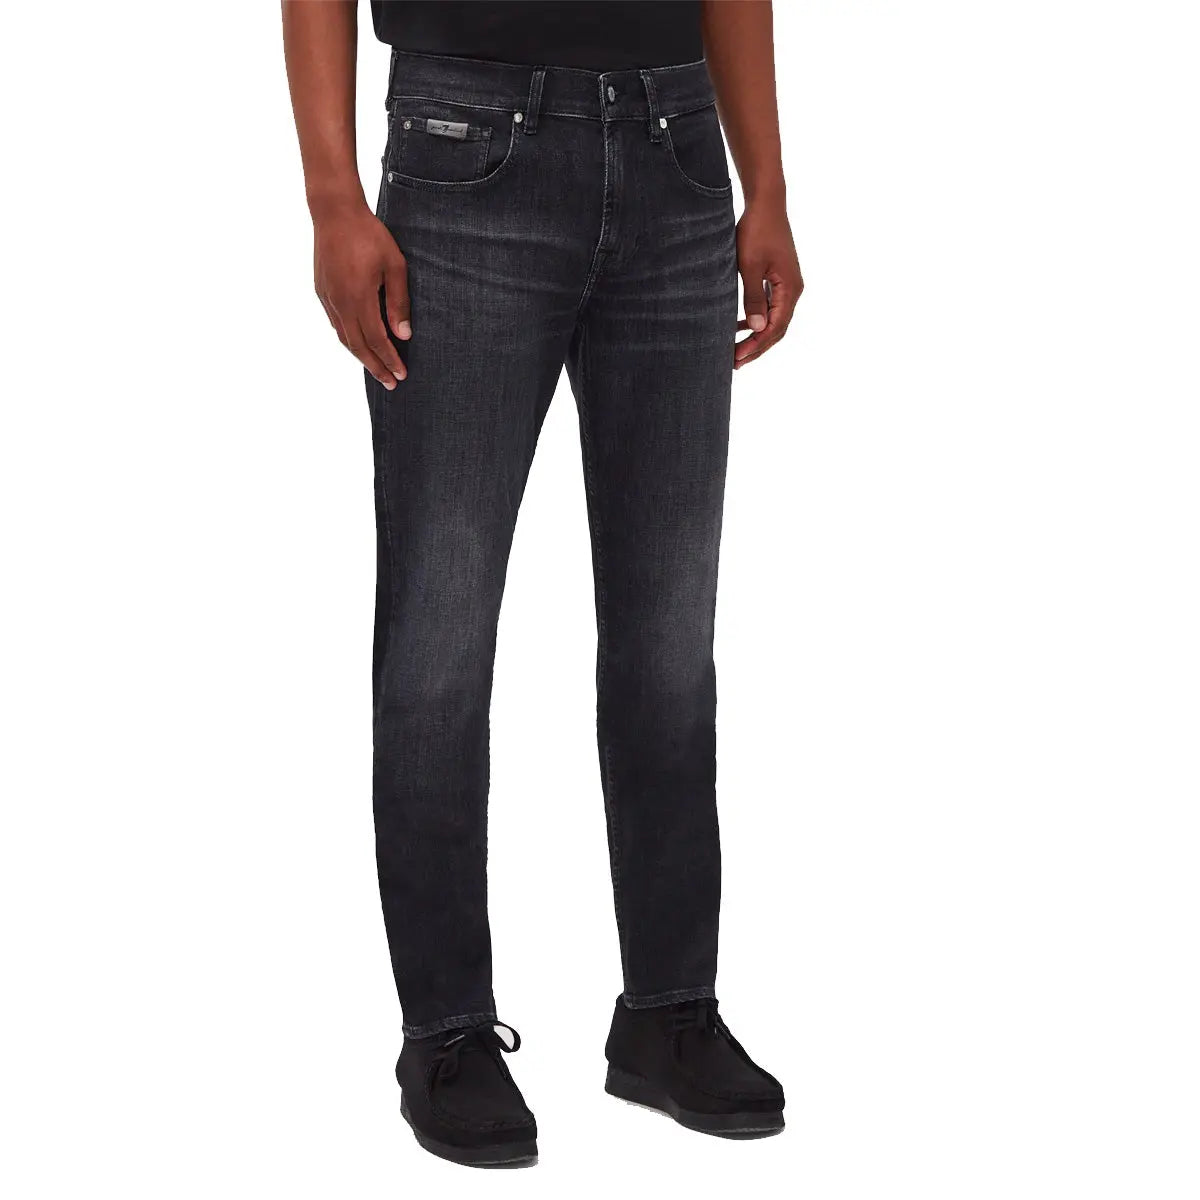 Black Special Edition Slimmy Tapered Jeans  7 For All Mankind   